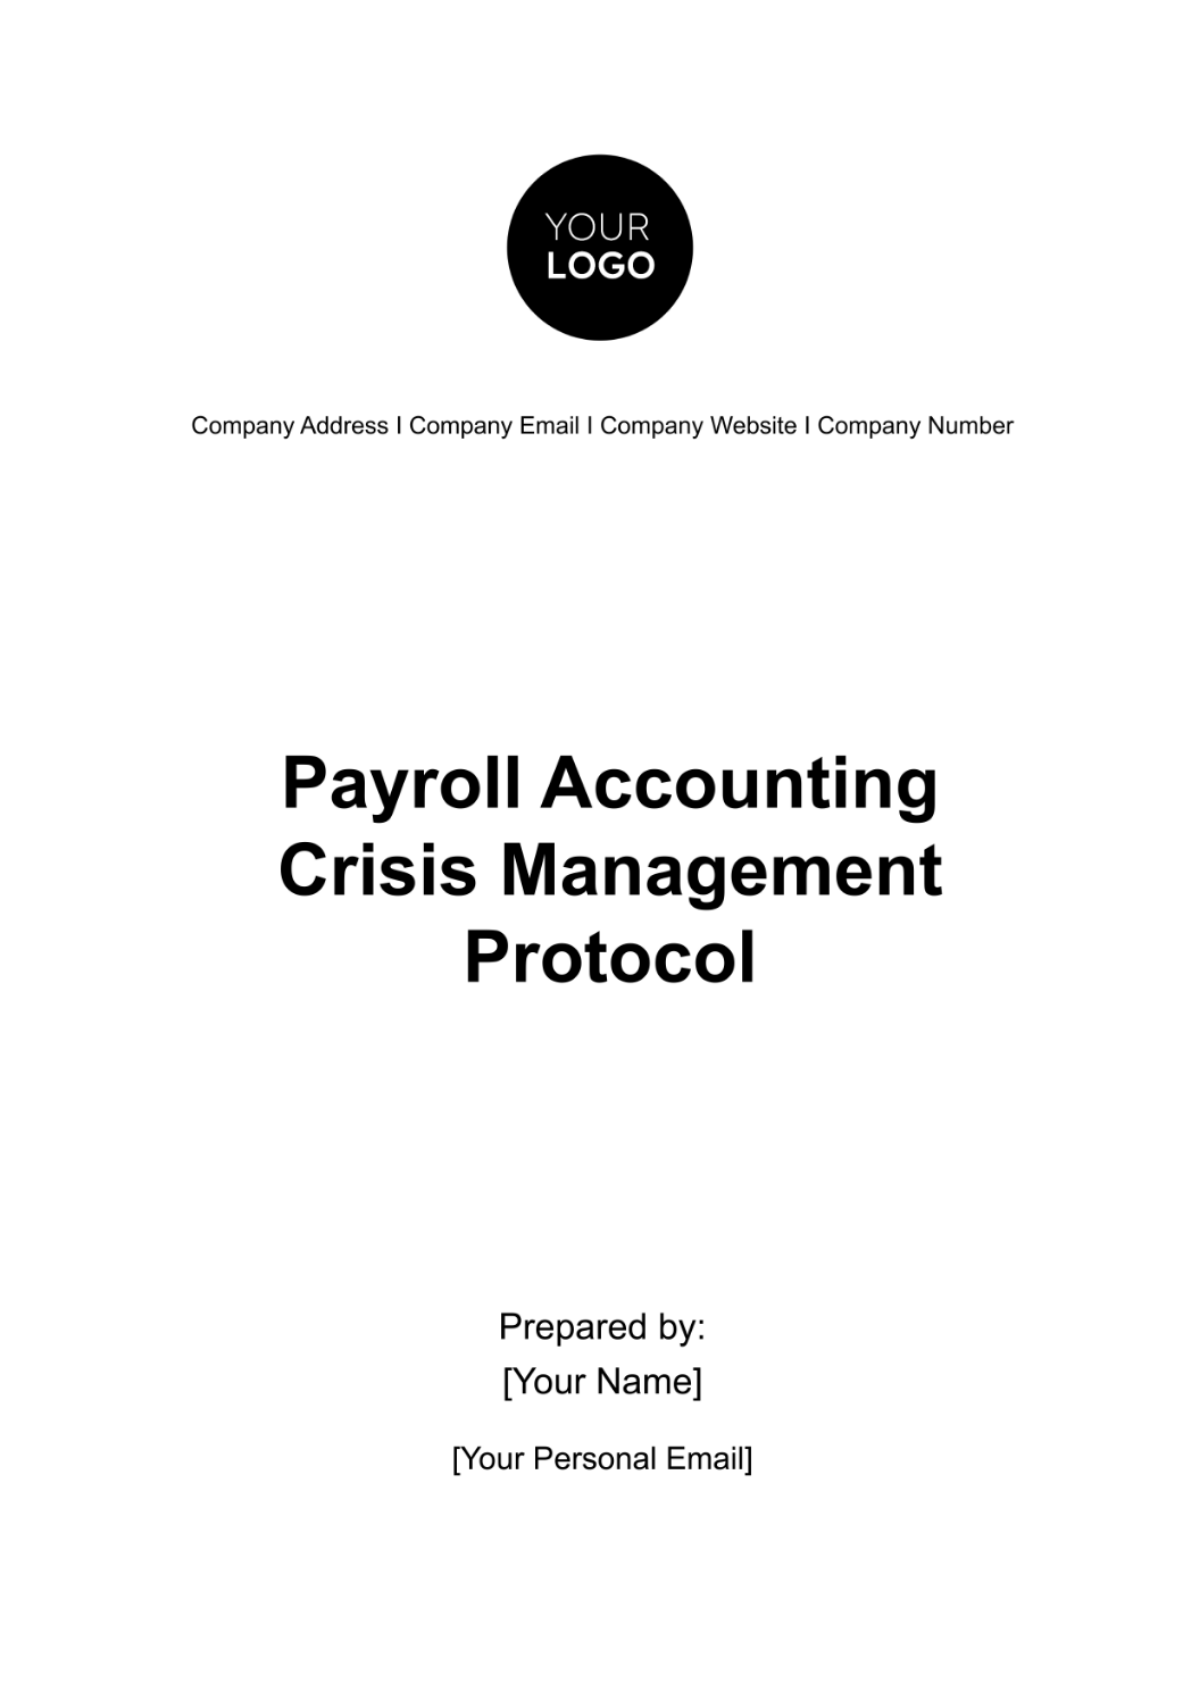 Free Payroll Accounting Crisis Management Protocol Template